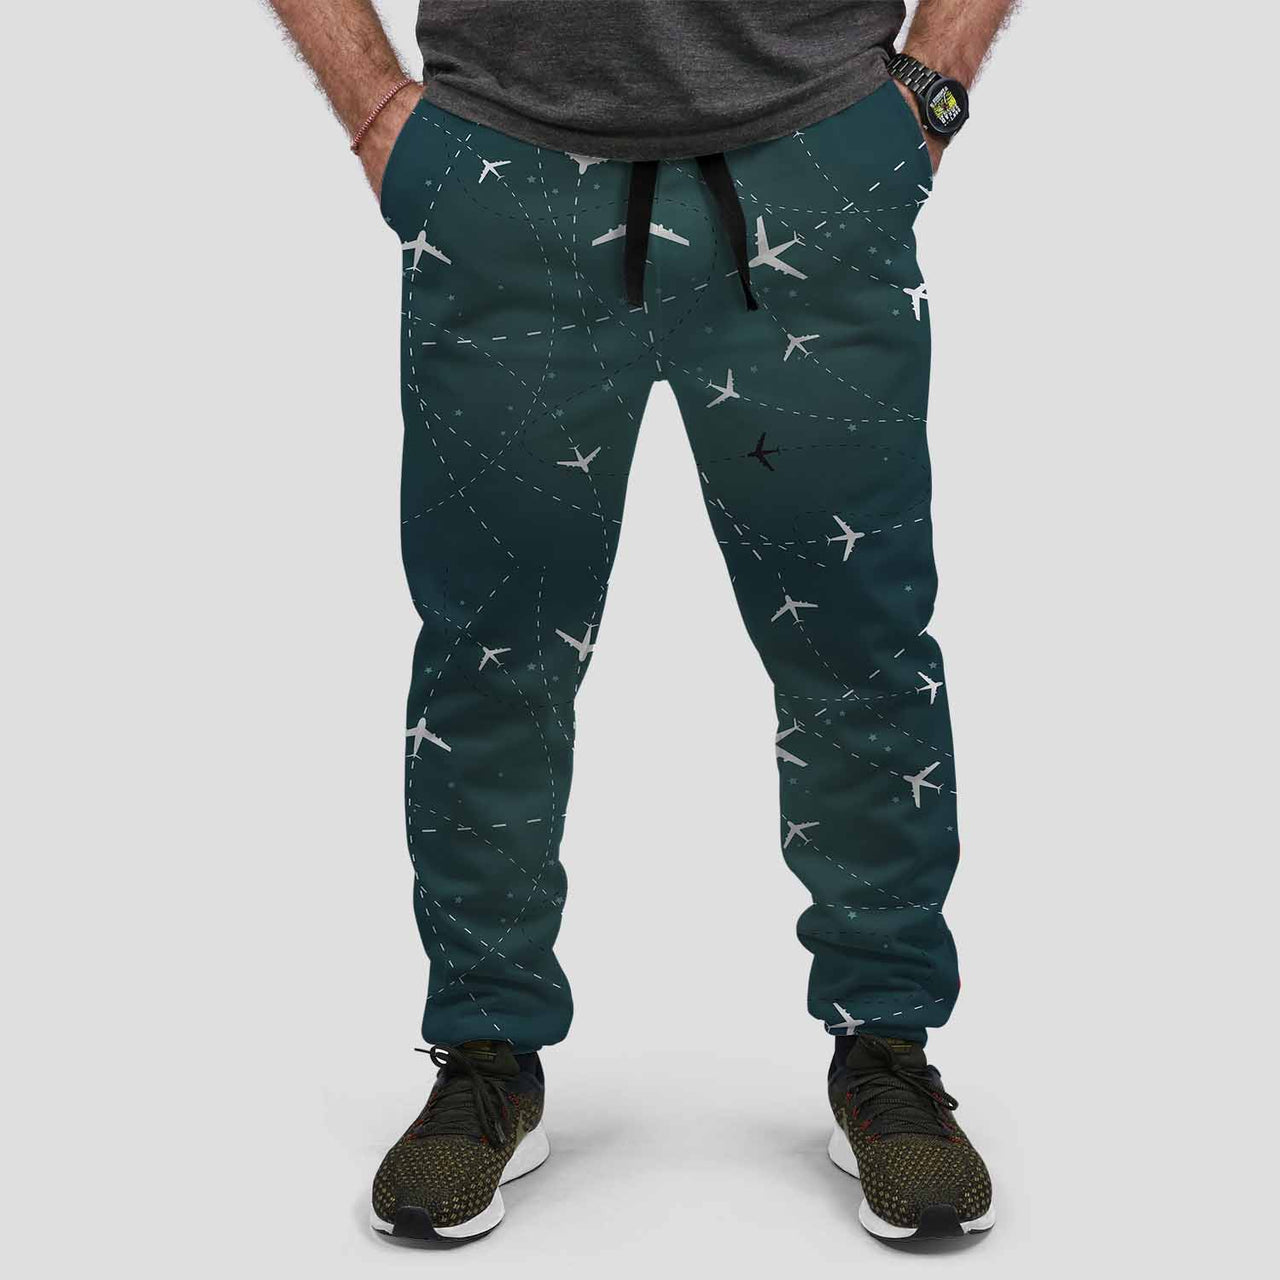 Travelling with Aircraft Designed Designed Sweat Pants & Trousers